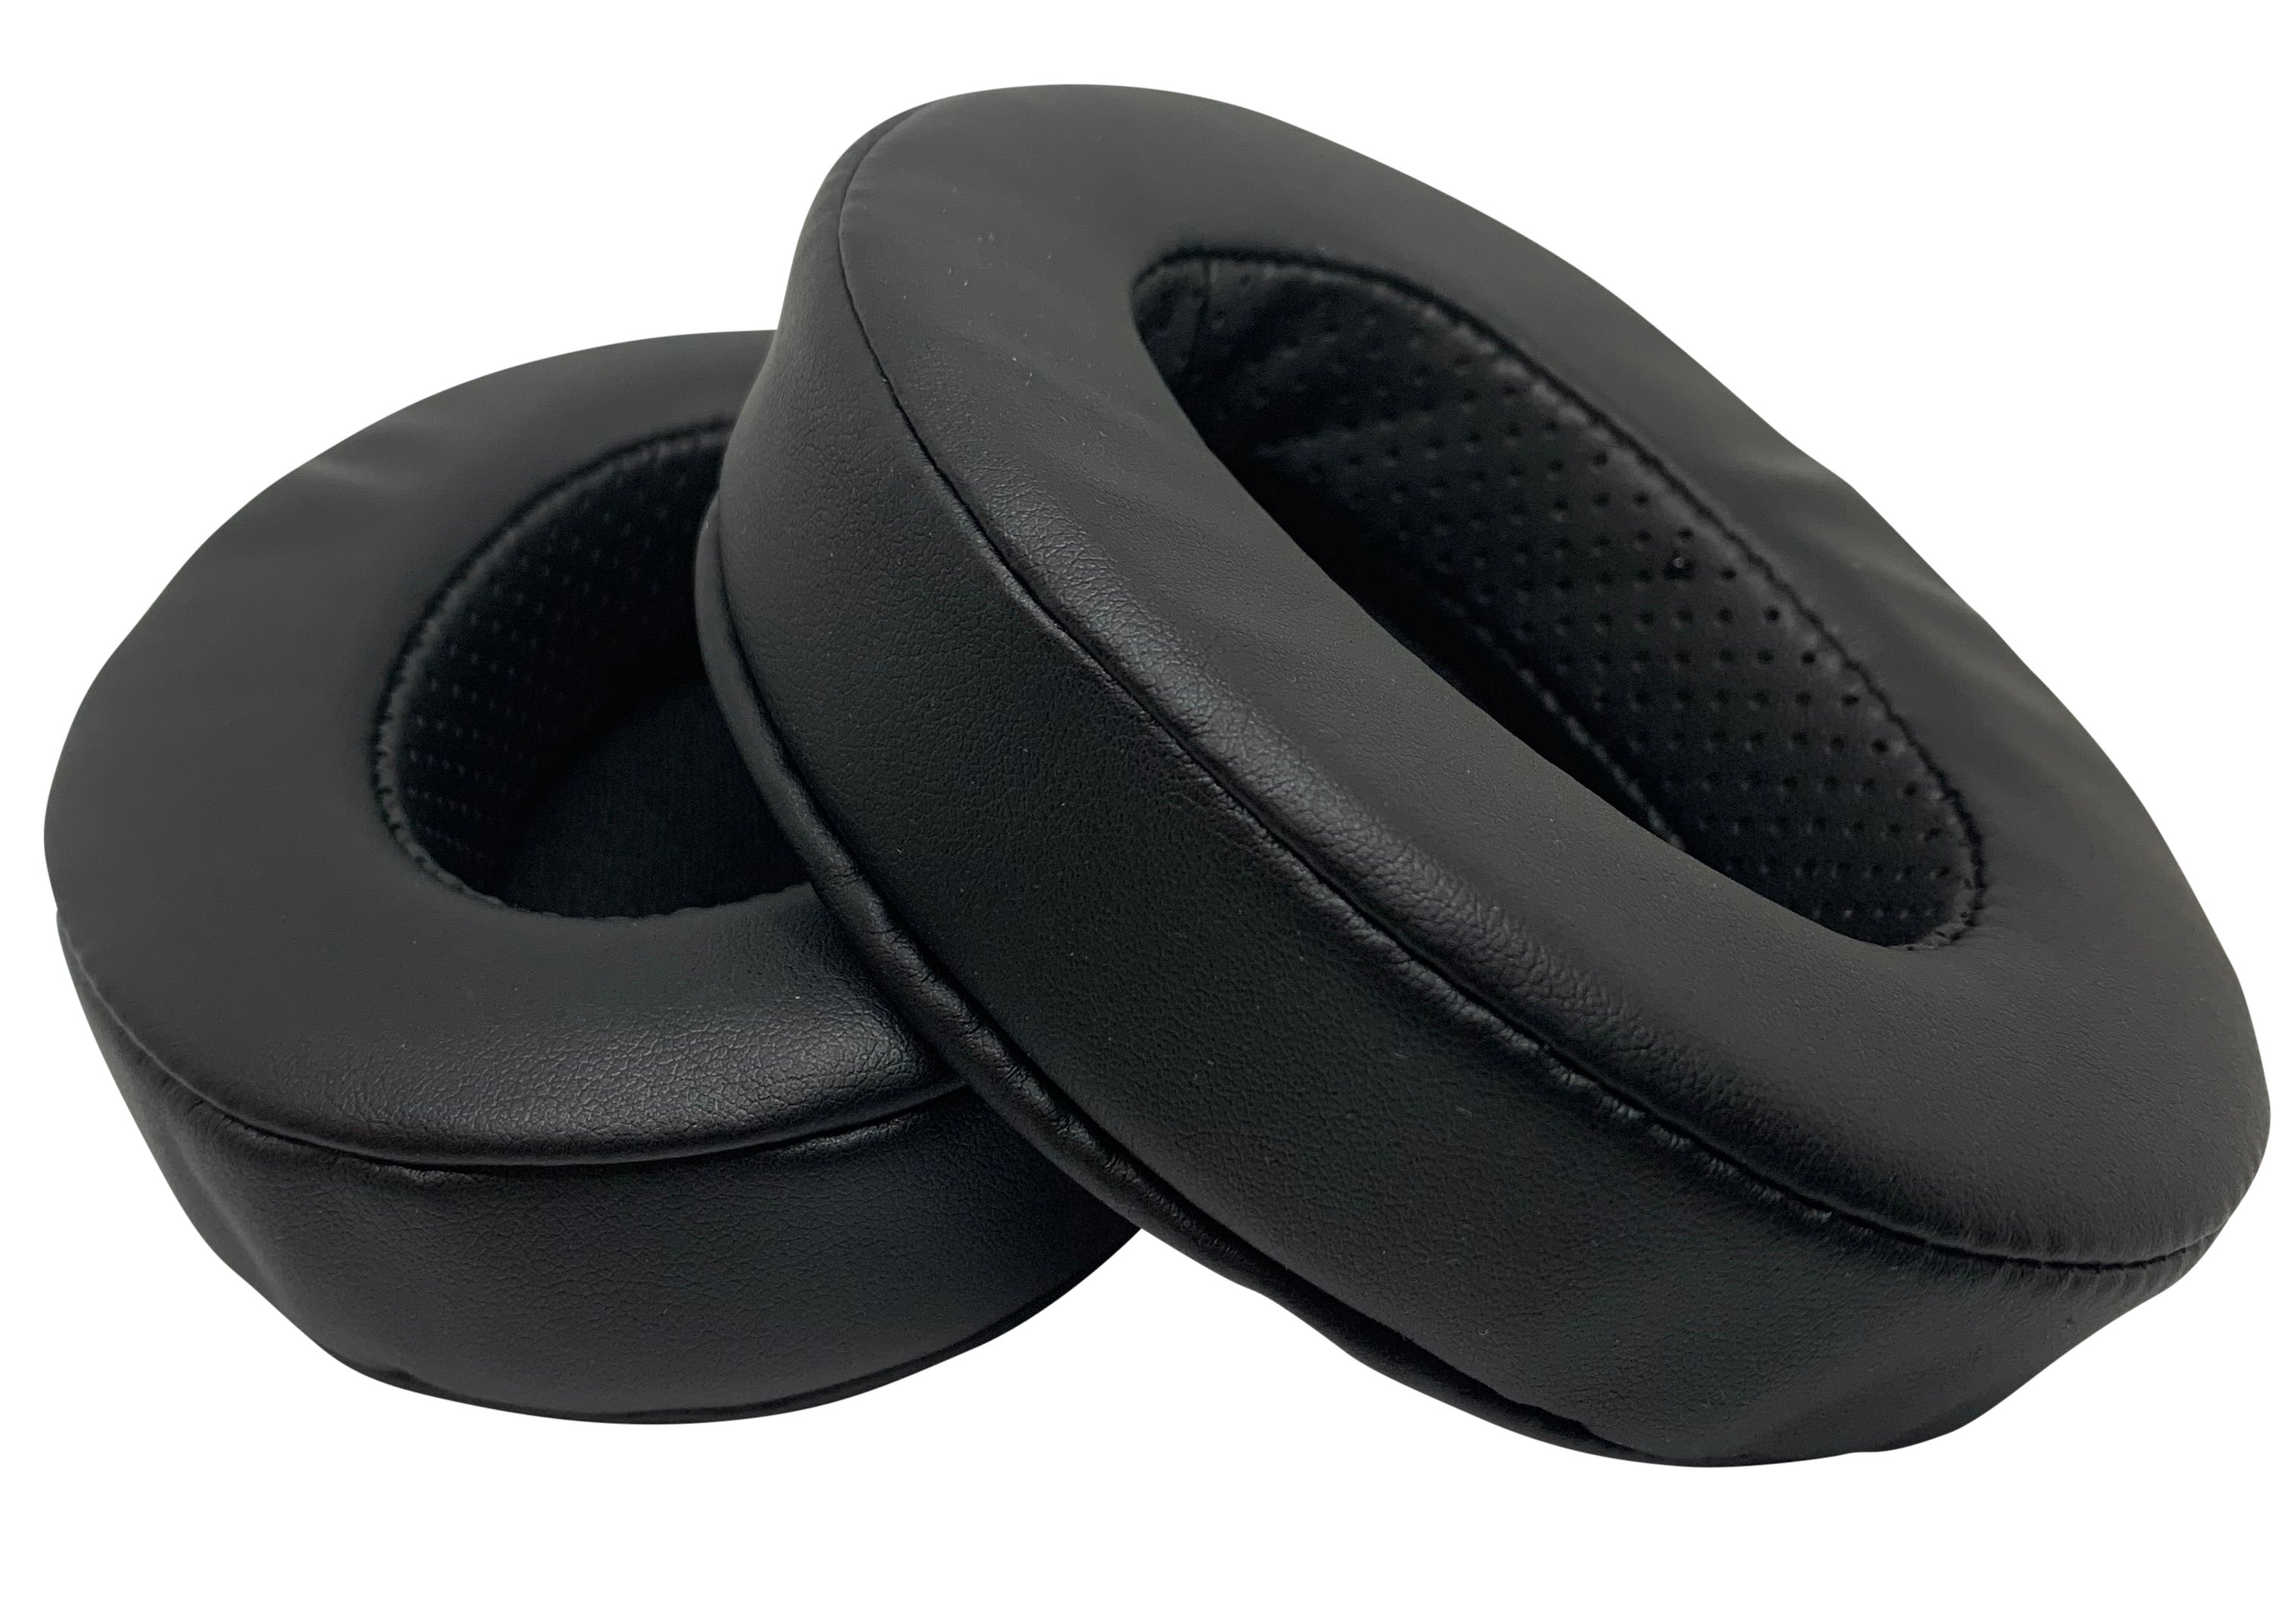 CentralSound Premium XL Upgraded Memory Foam Ear Pad Cushions for Kingston HyperX Gaming Headsets - CentralSound